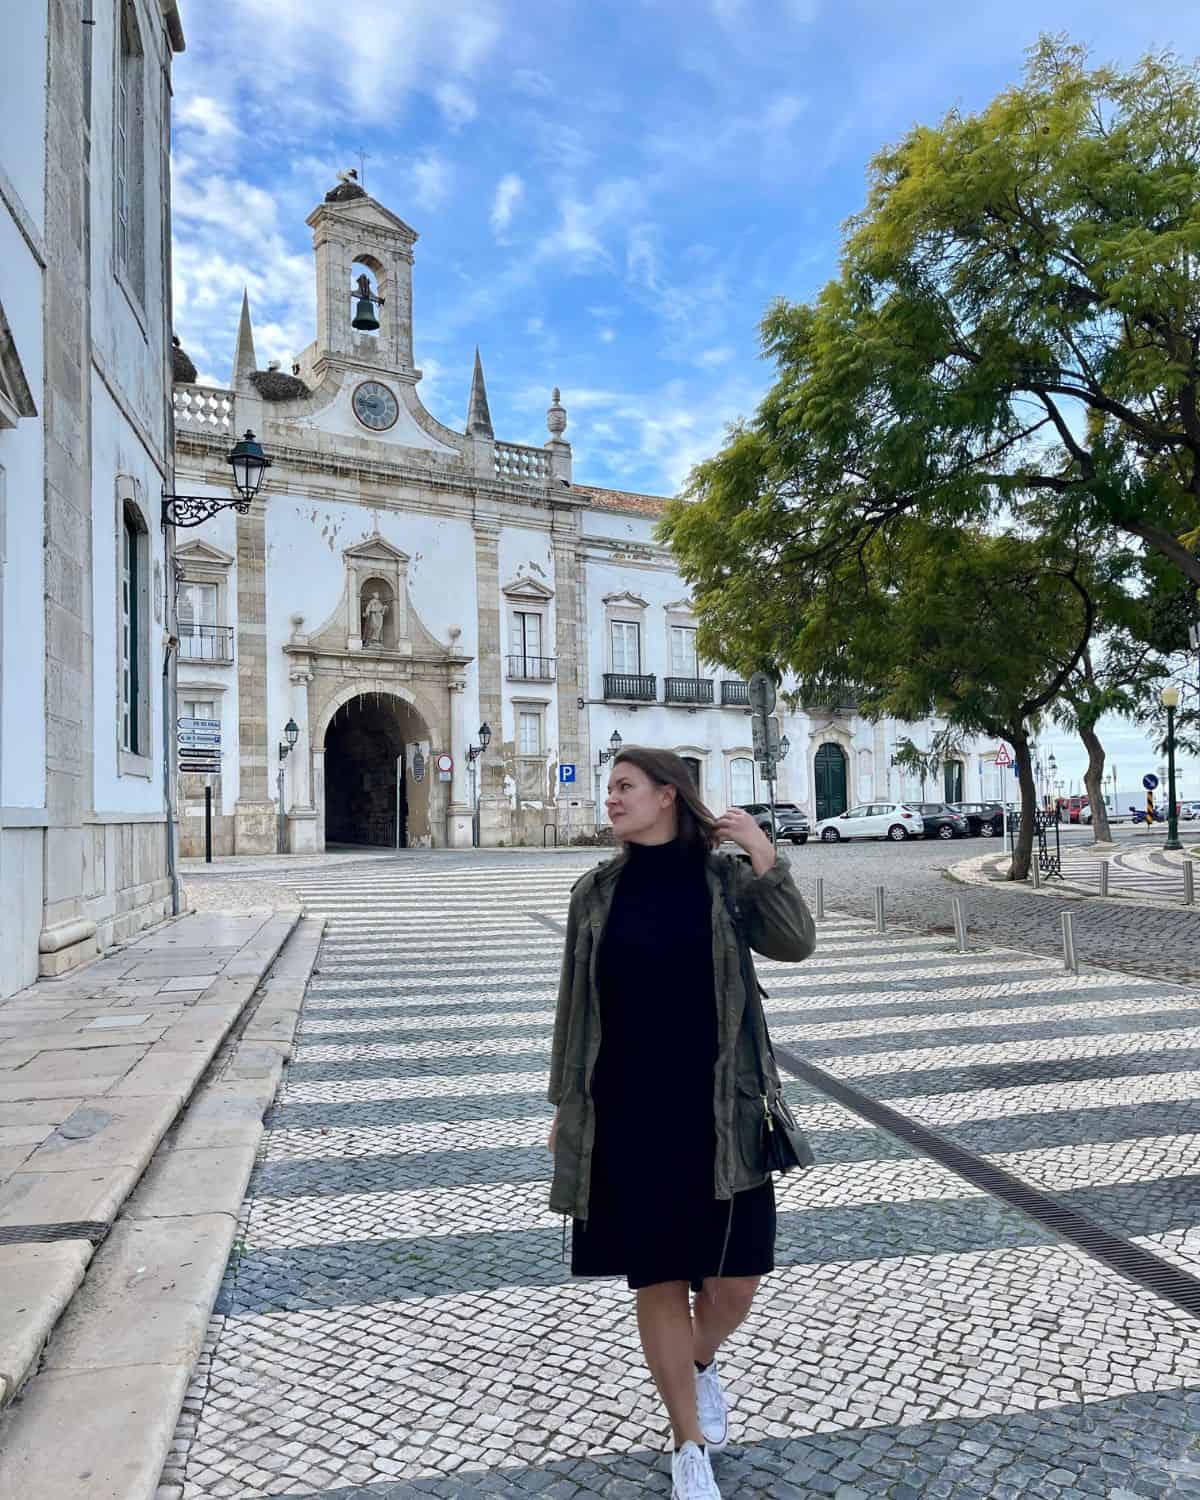 A solo female traveler in a black dress and green jacket stands on a cobblestone street in Faro, Portugal.